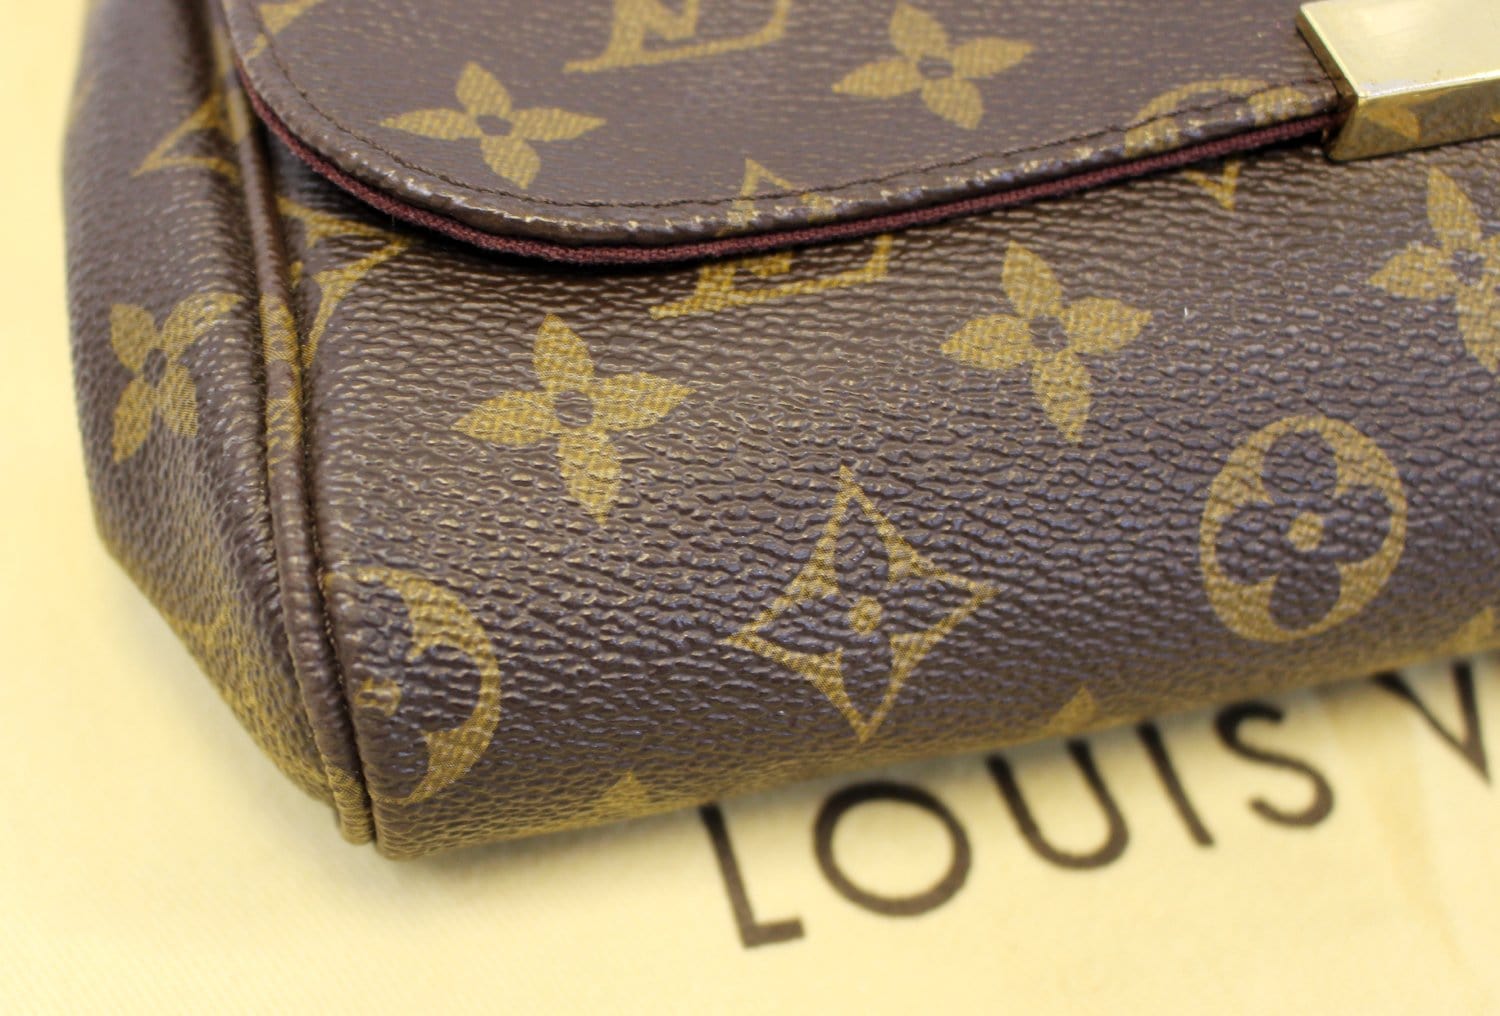 👜 Top 6 Best Louis Vuitton Bag For Everyday Use 2023 👜 - Louis